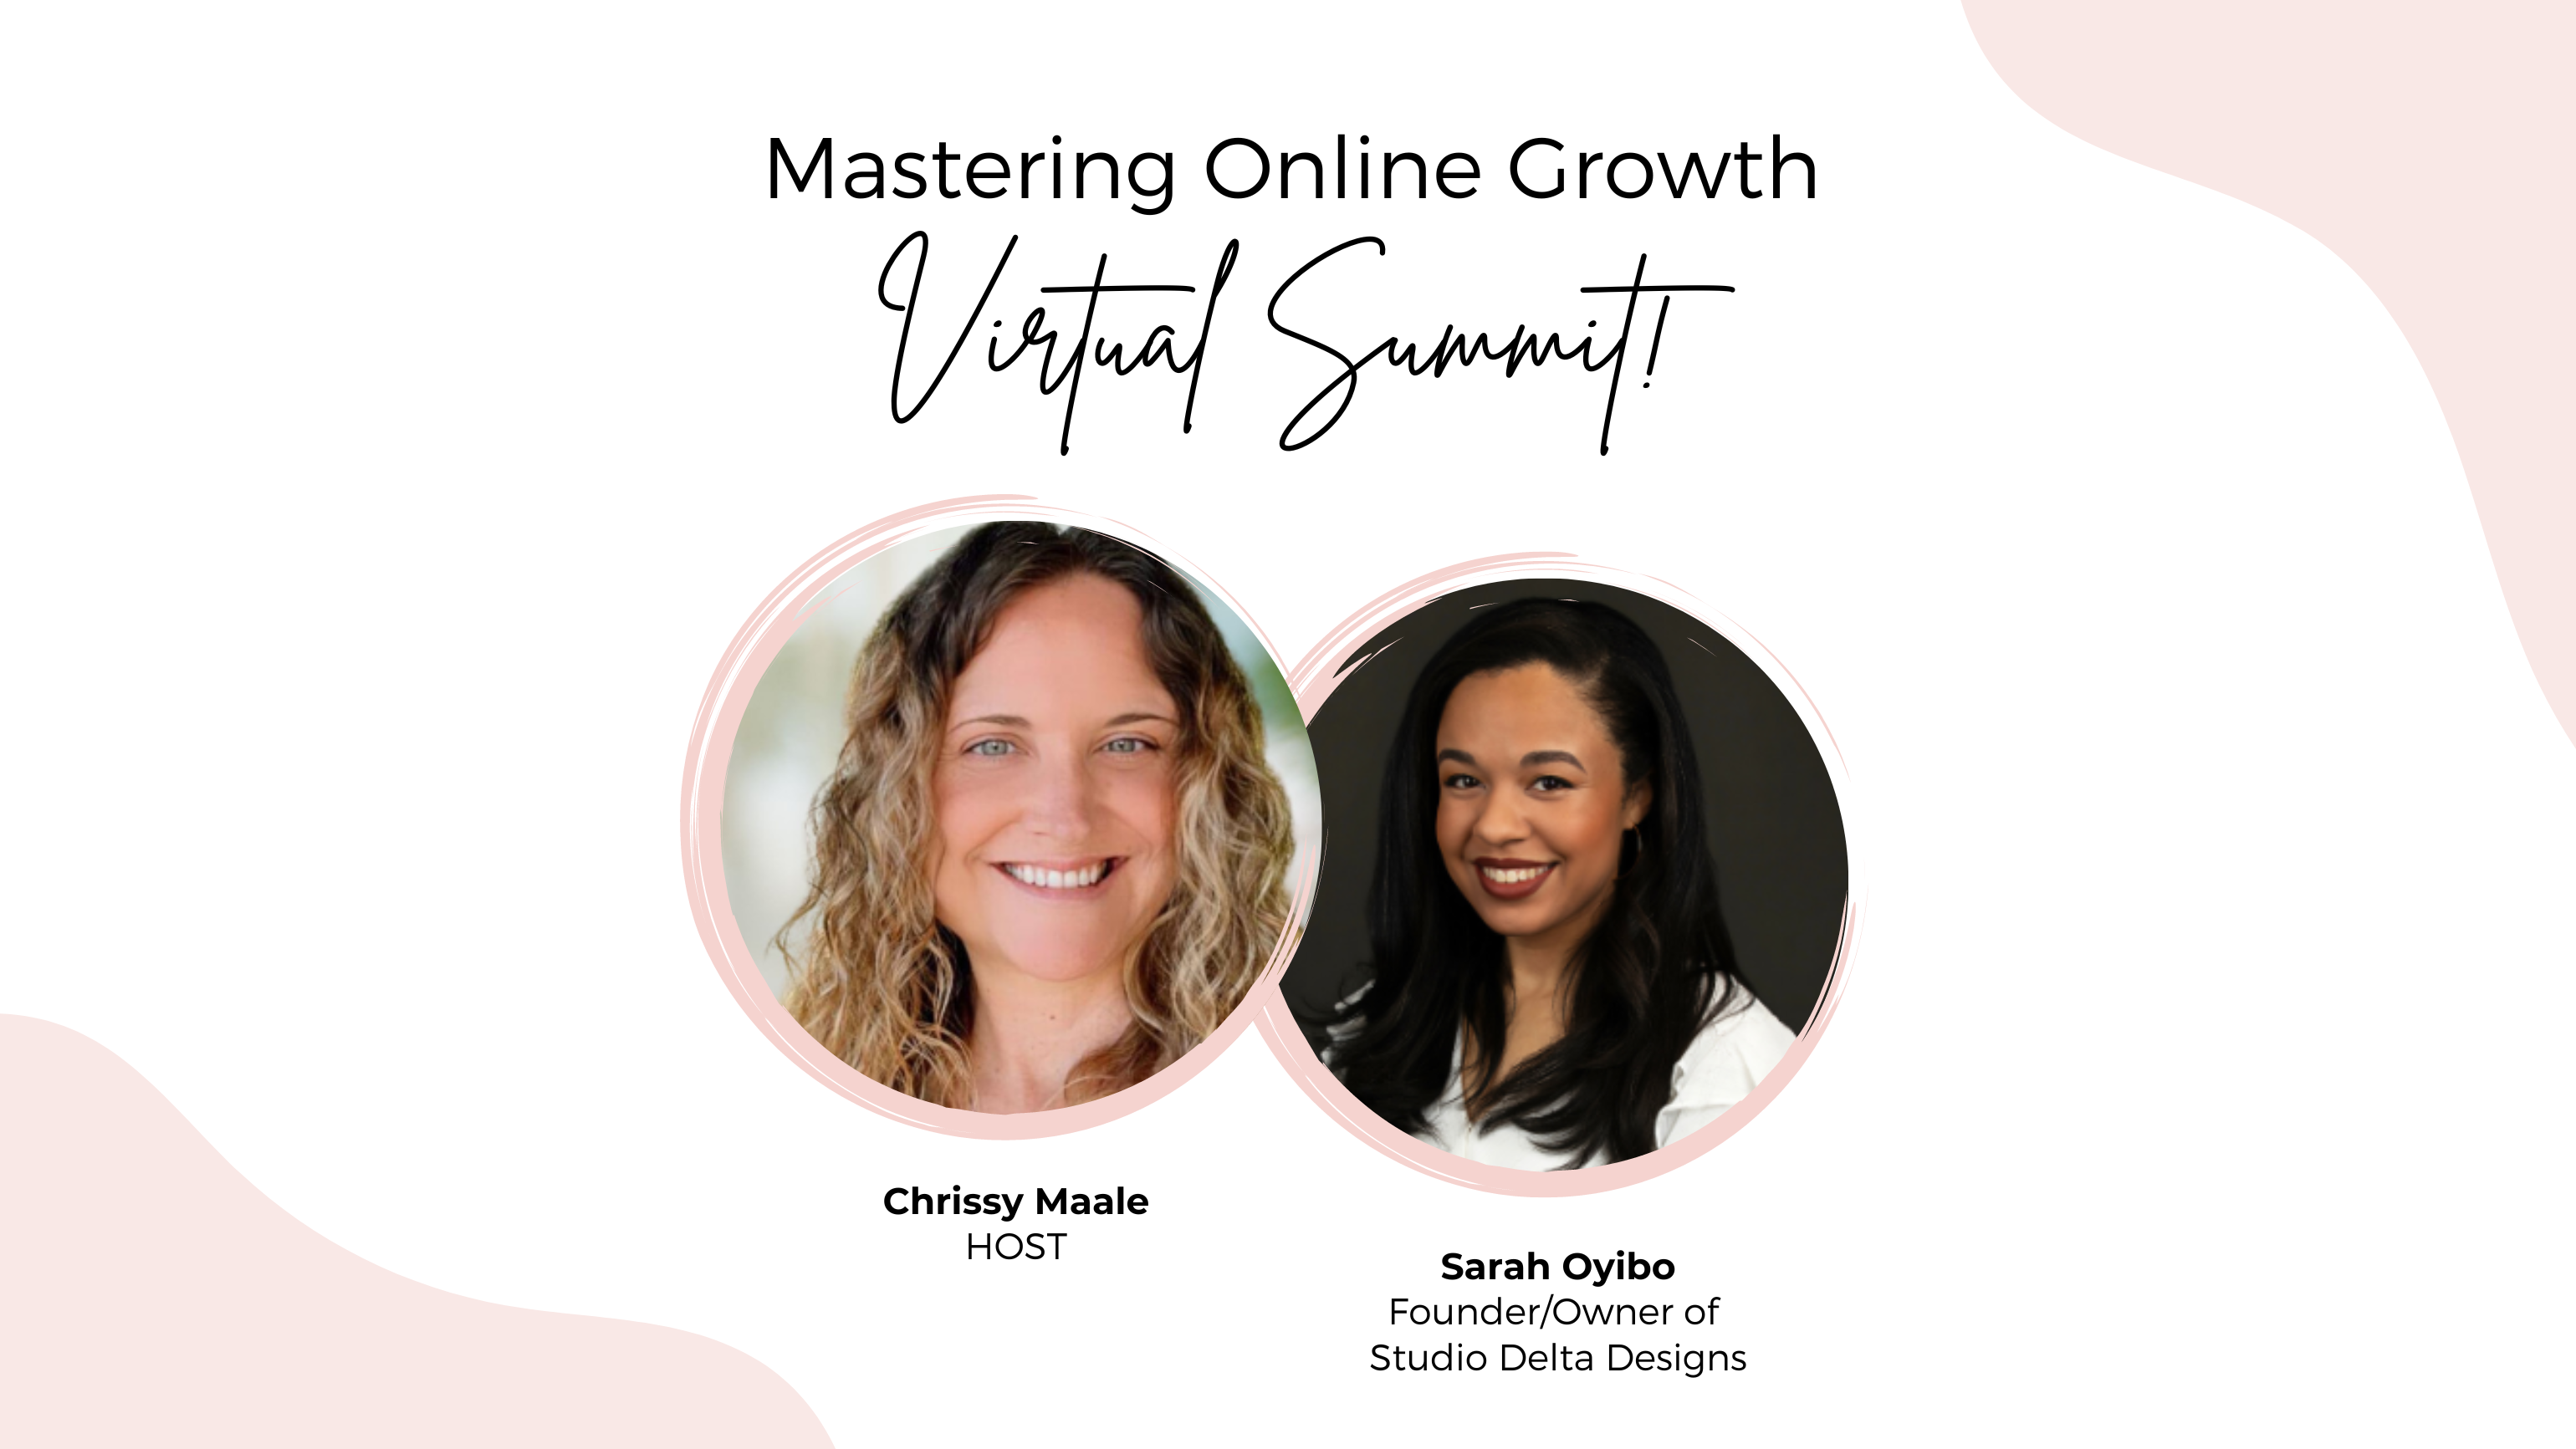 Mastering Online Growth Virtual Summit Featuring Chrissy Maale and Sarah Oyibo